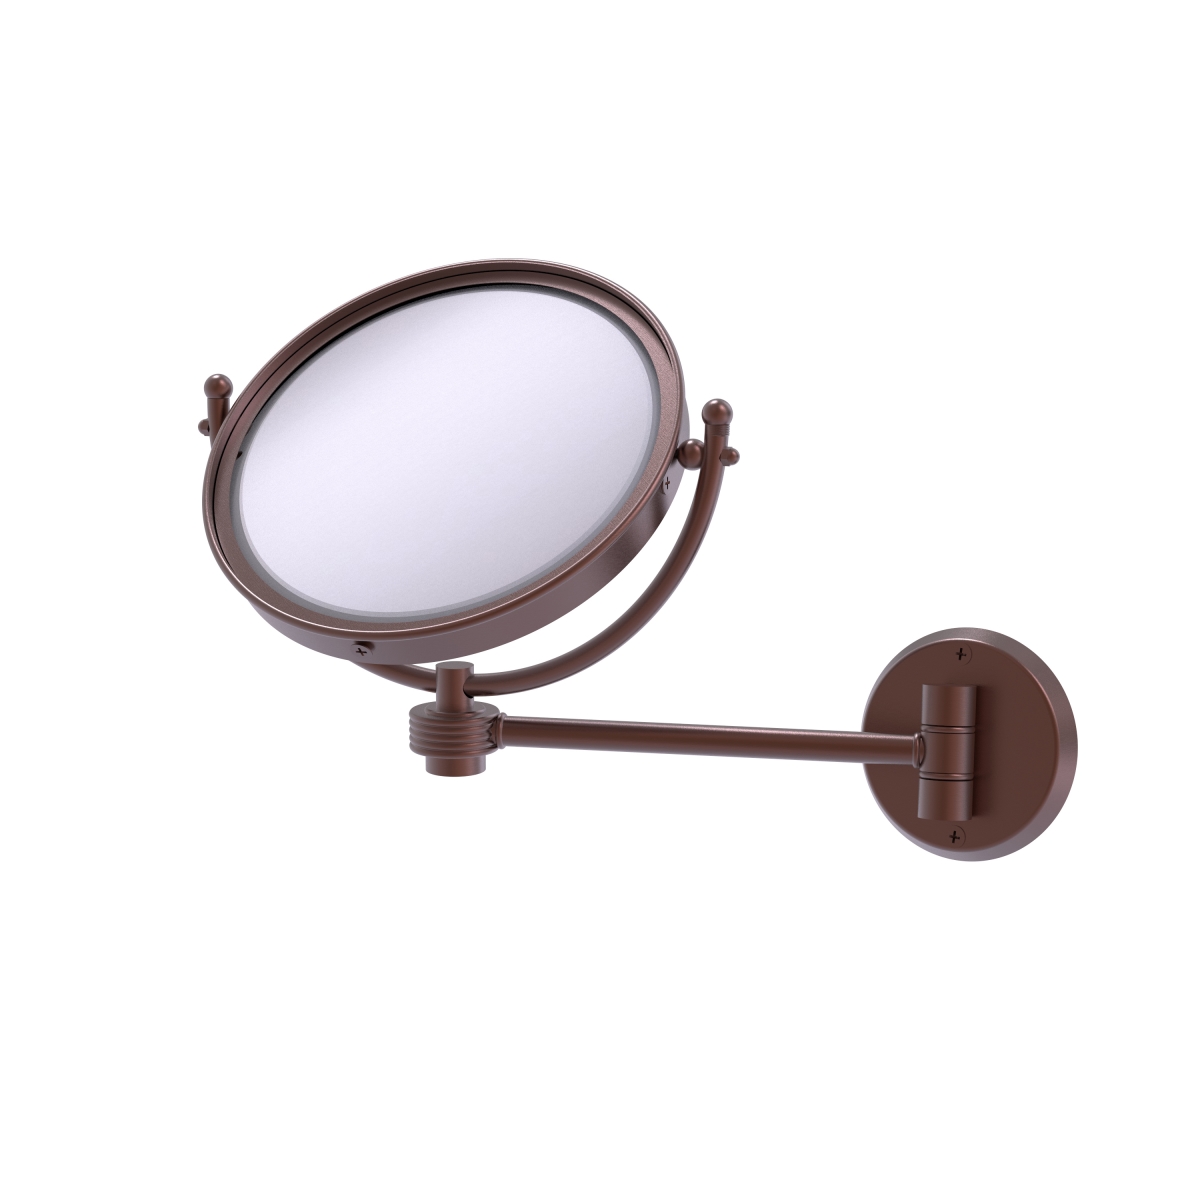 WM-5G-4X-CA 8 in. Wall Mounted Make-Up Mirror 4X Magnification, Antique Copper - 10 x 8 x 11 in -  Allied Brass, WM-5G/4X-CA